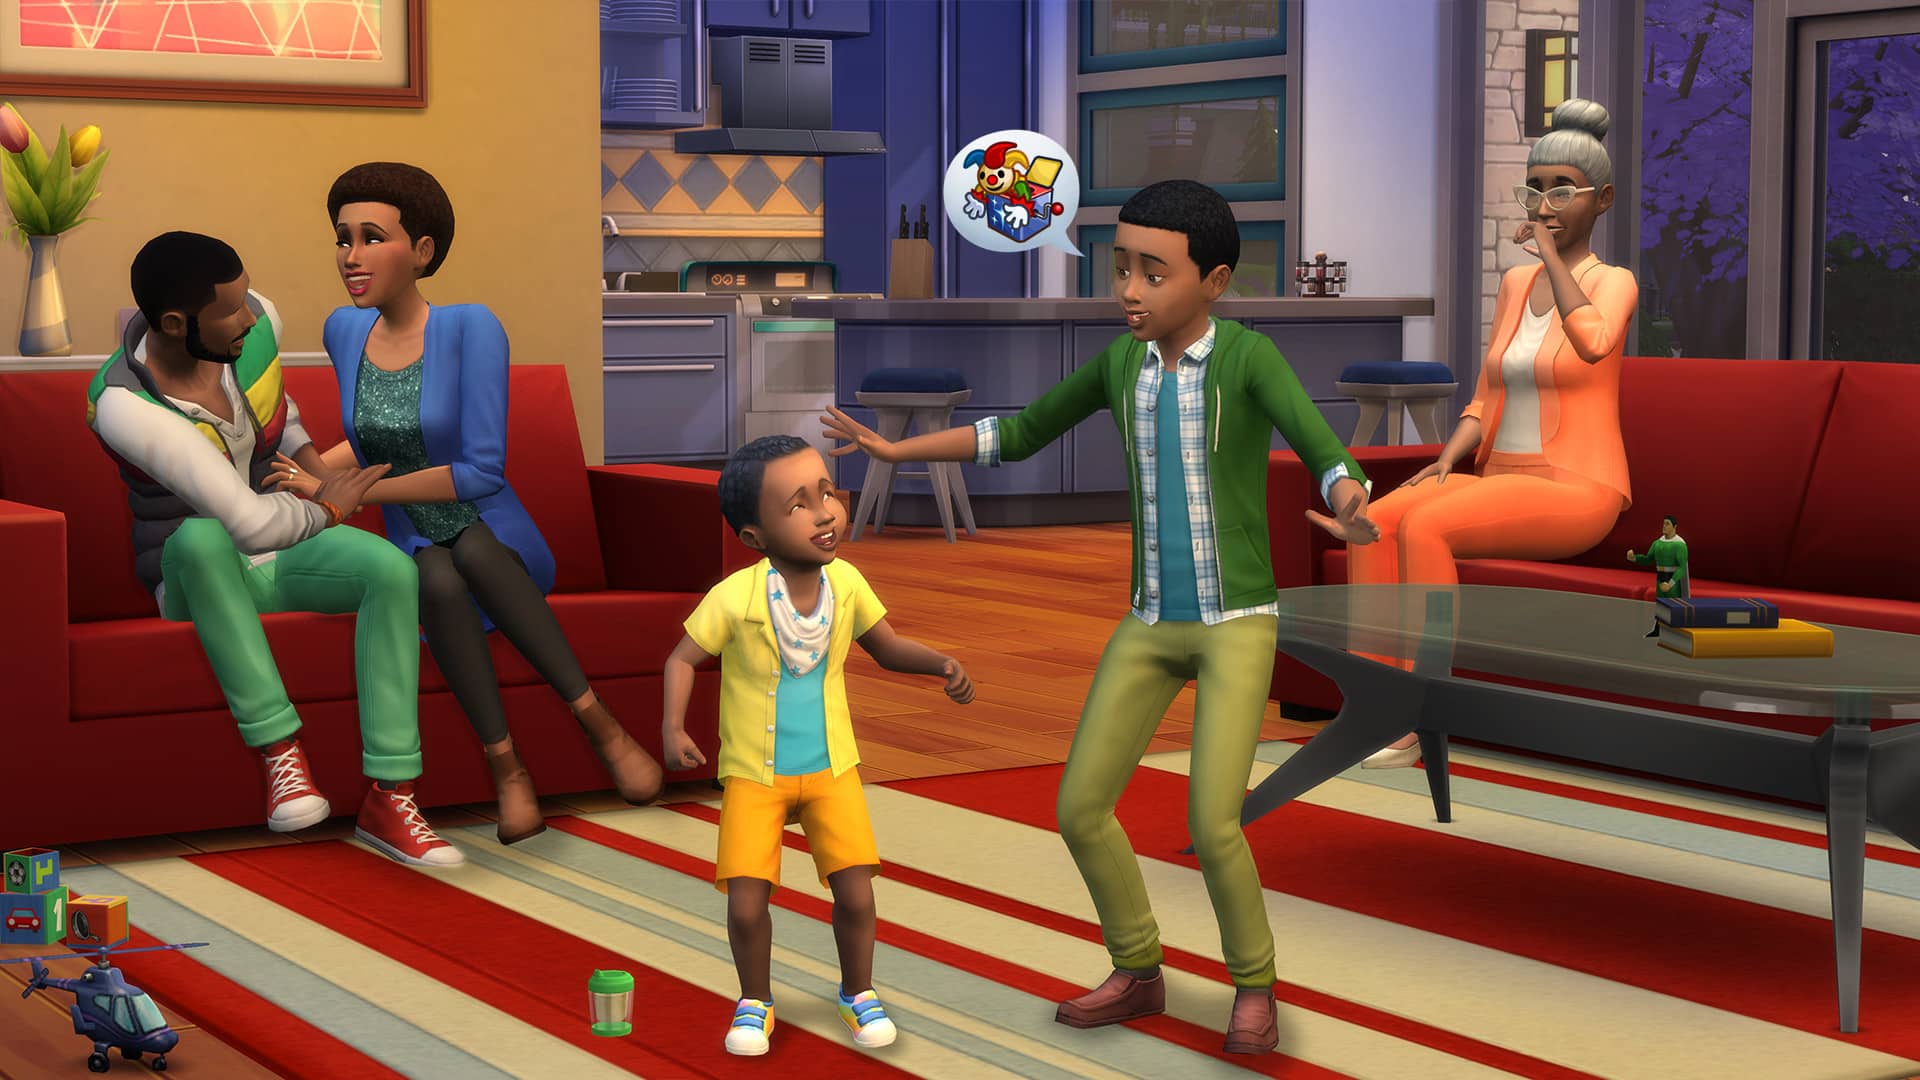 Cheerful sims are mostly happy all the time.